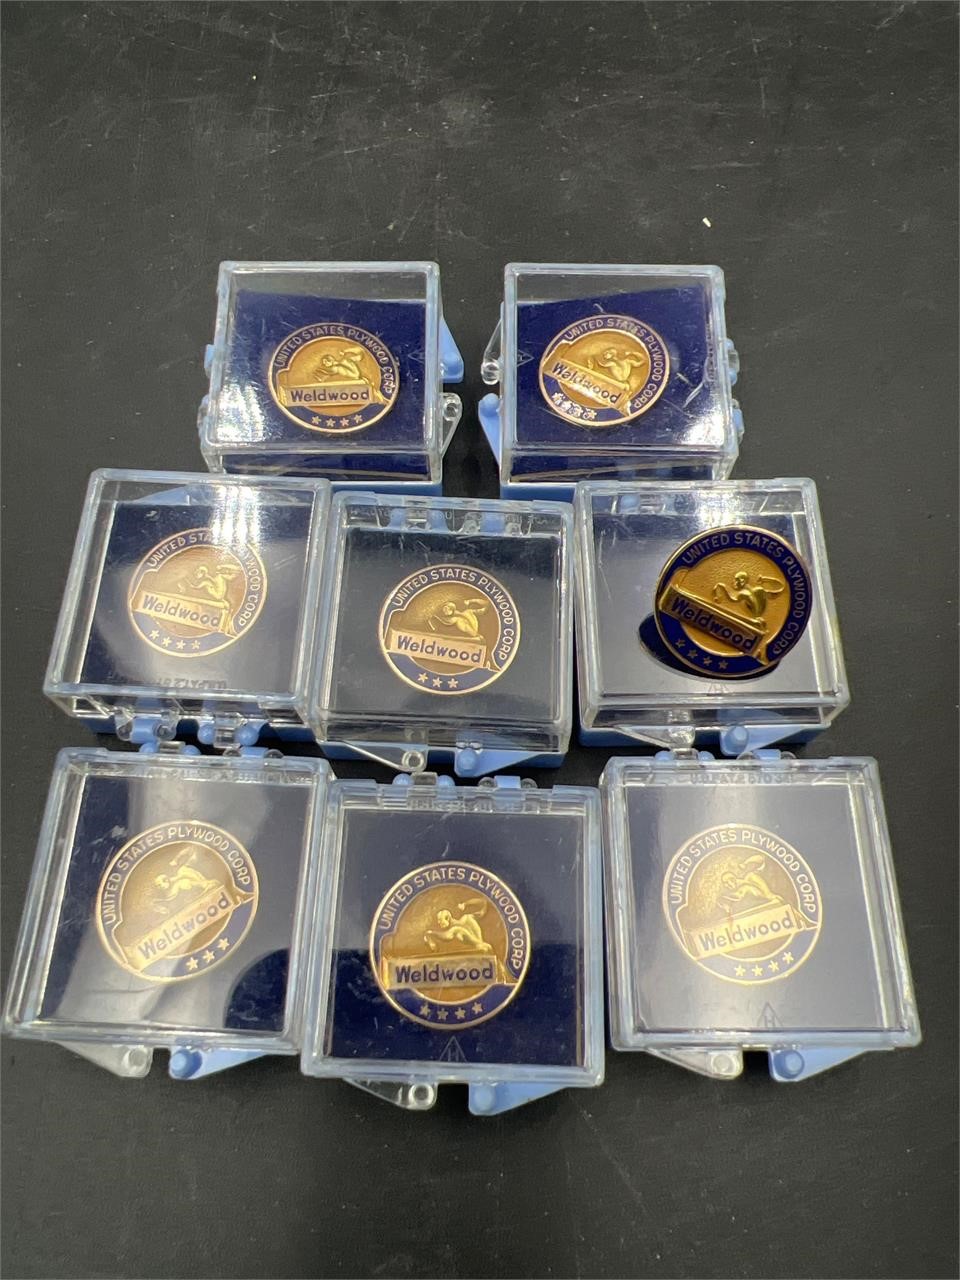 CTO 10K Weldwood United States Plywood Corp pins